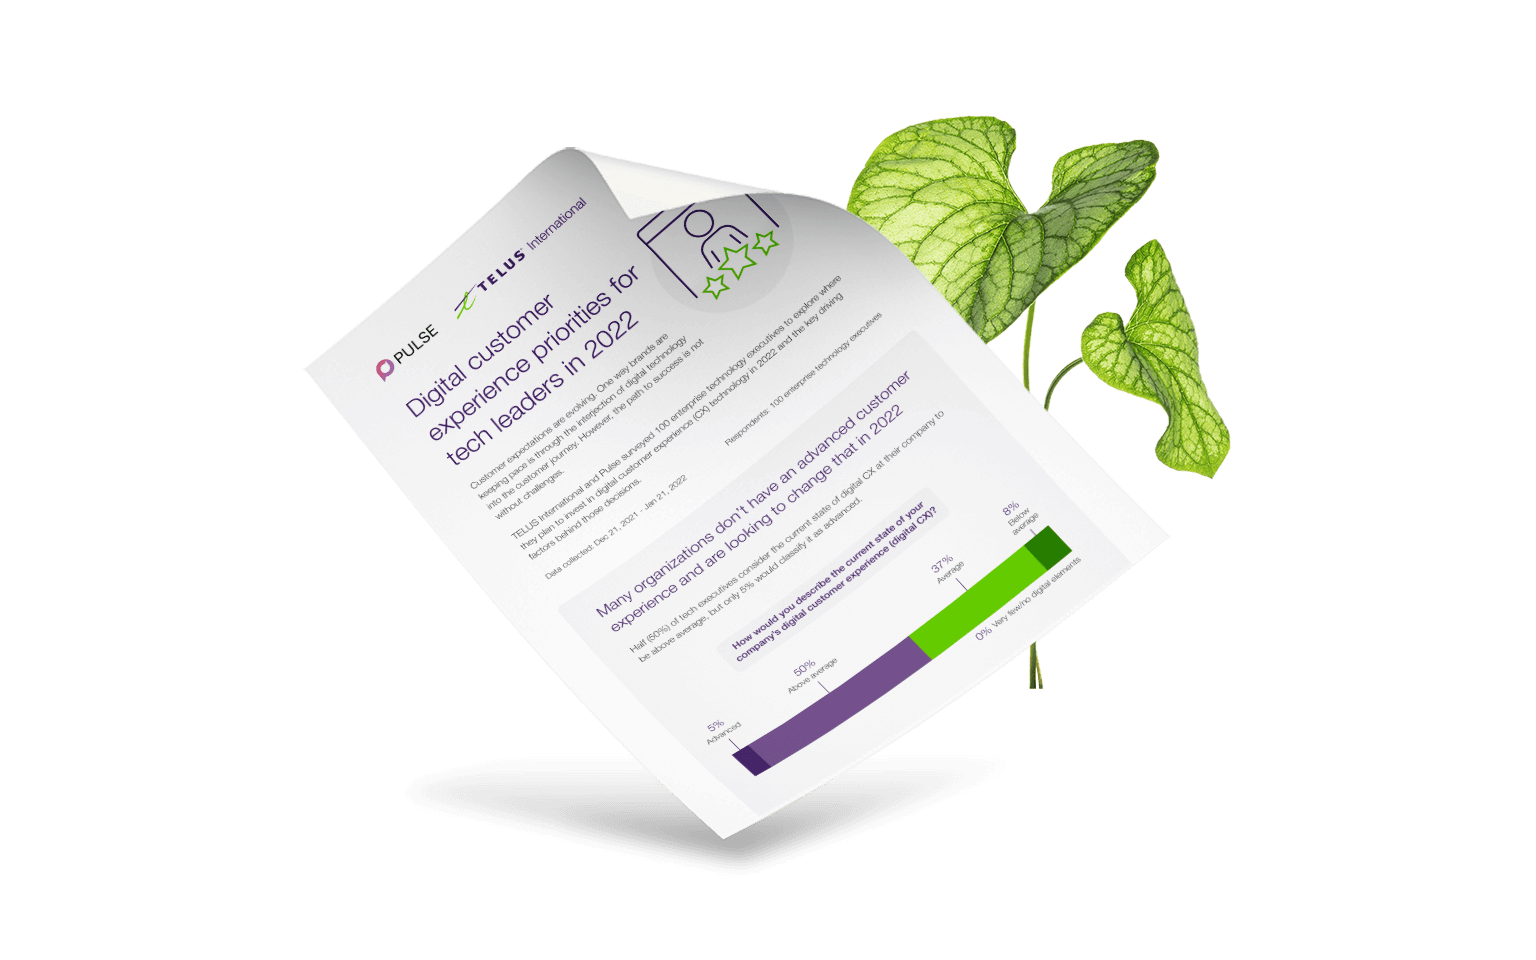 Digital customer experience priorities white paper with green plant in the background